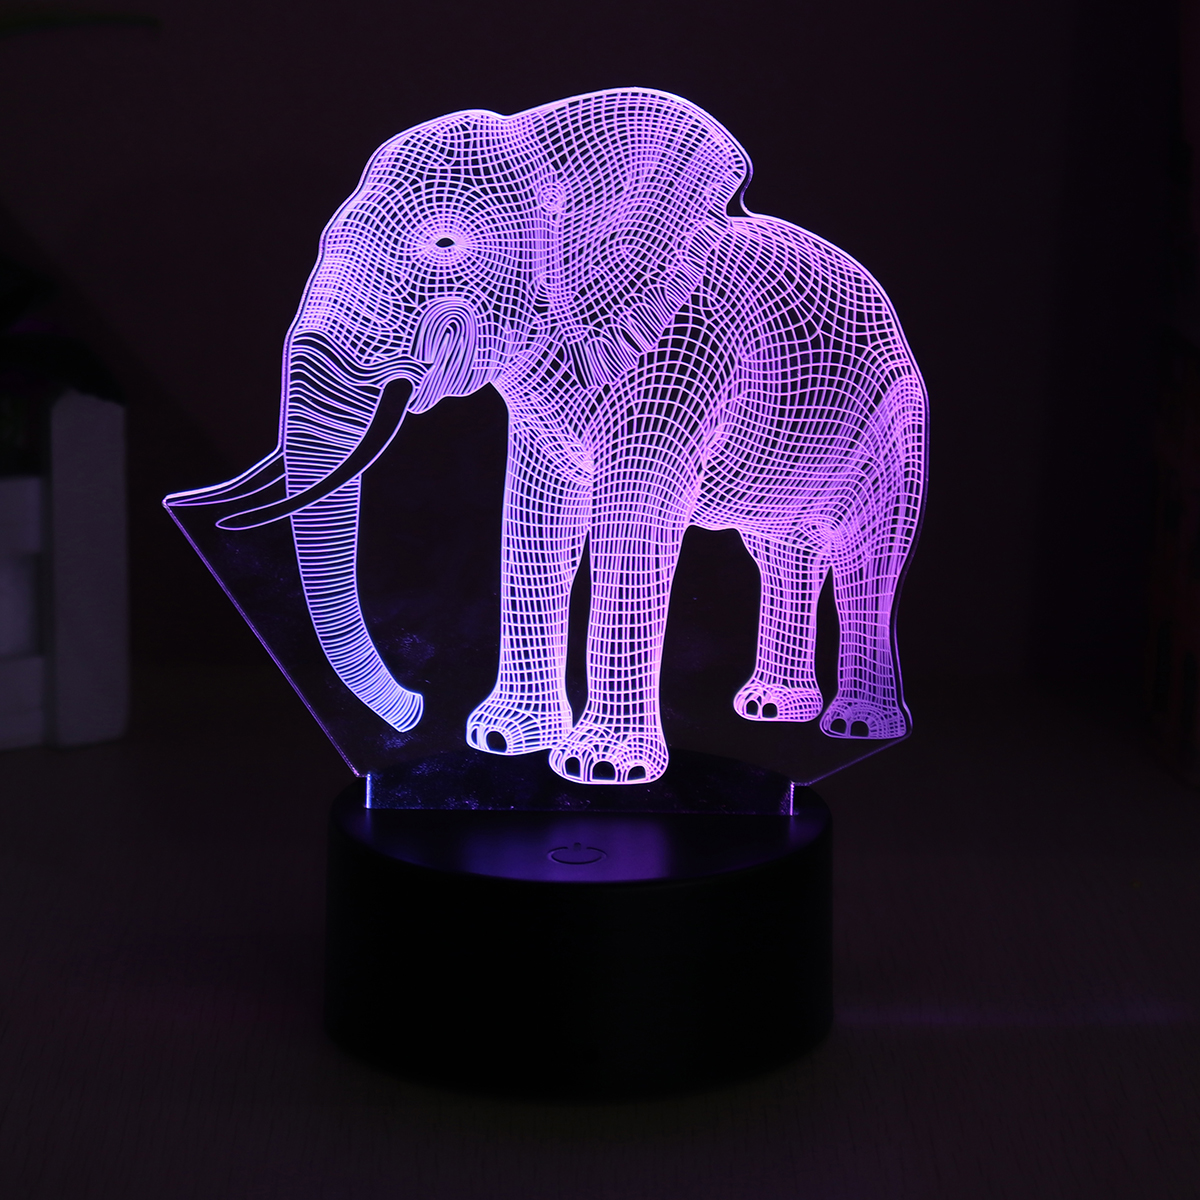 3D-Acrylic-LED-716-Colors-Colorful-Night-Lights-Elephant-Model-Remote-Control-Touch-Switch-Night-Lig-1370467-10